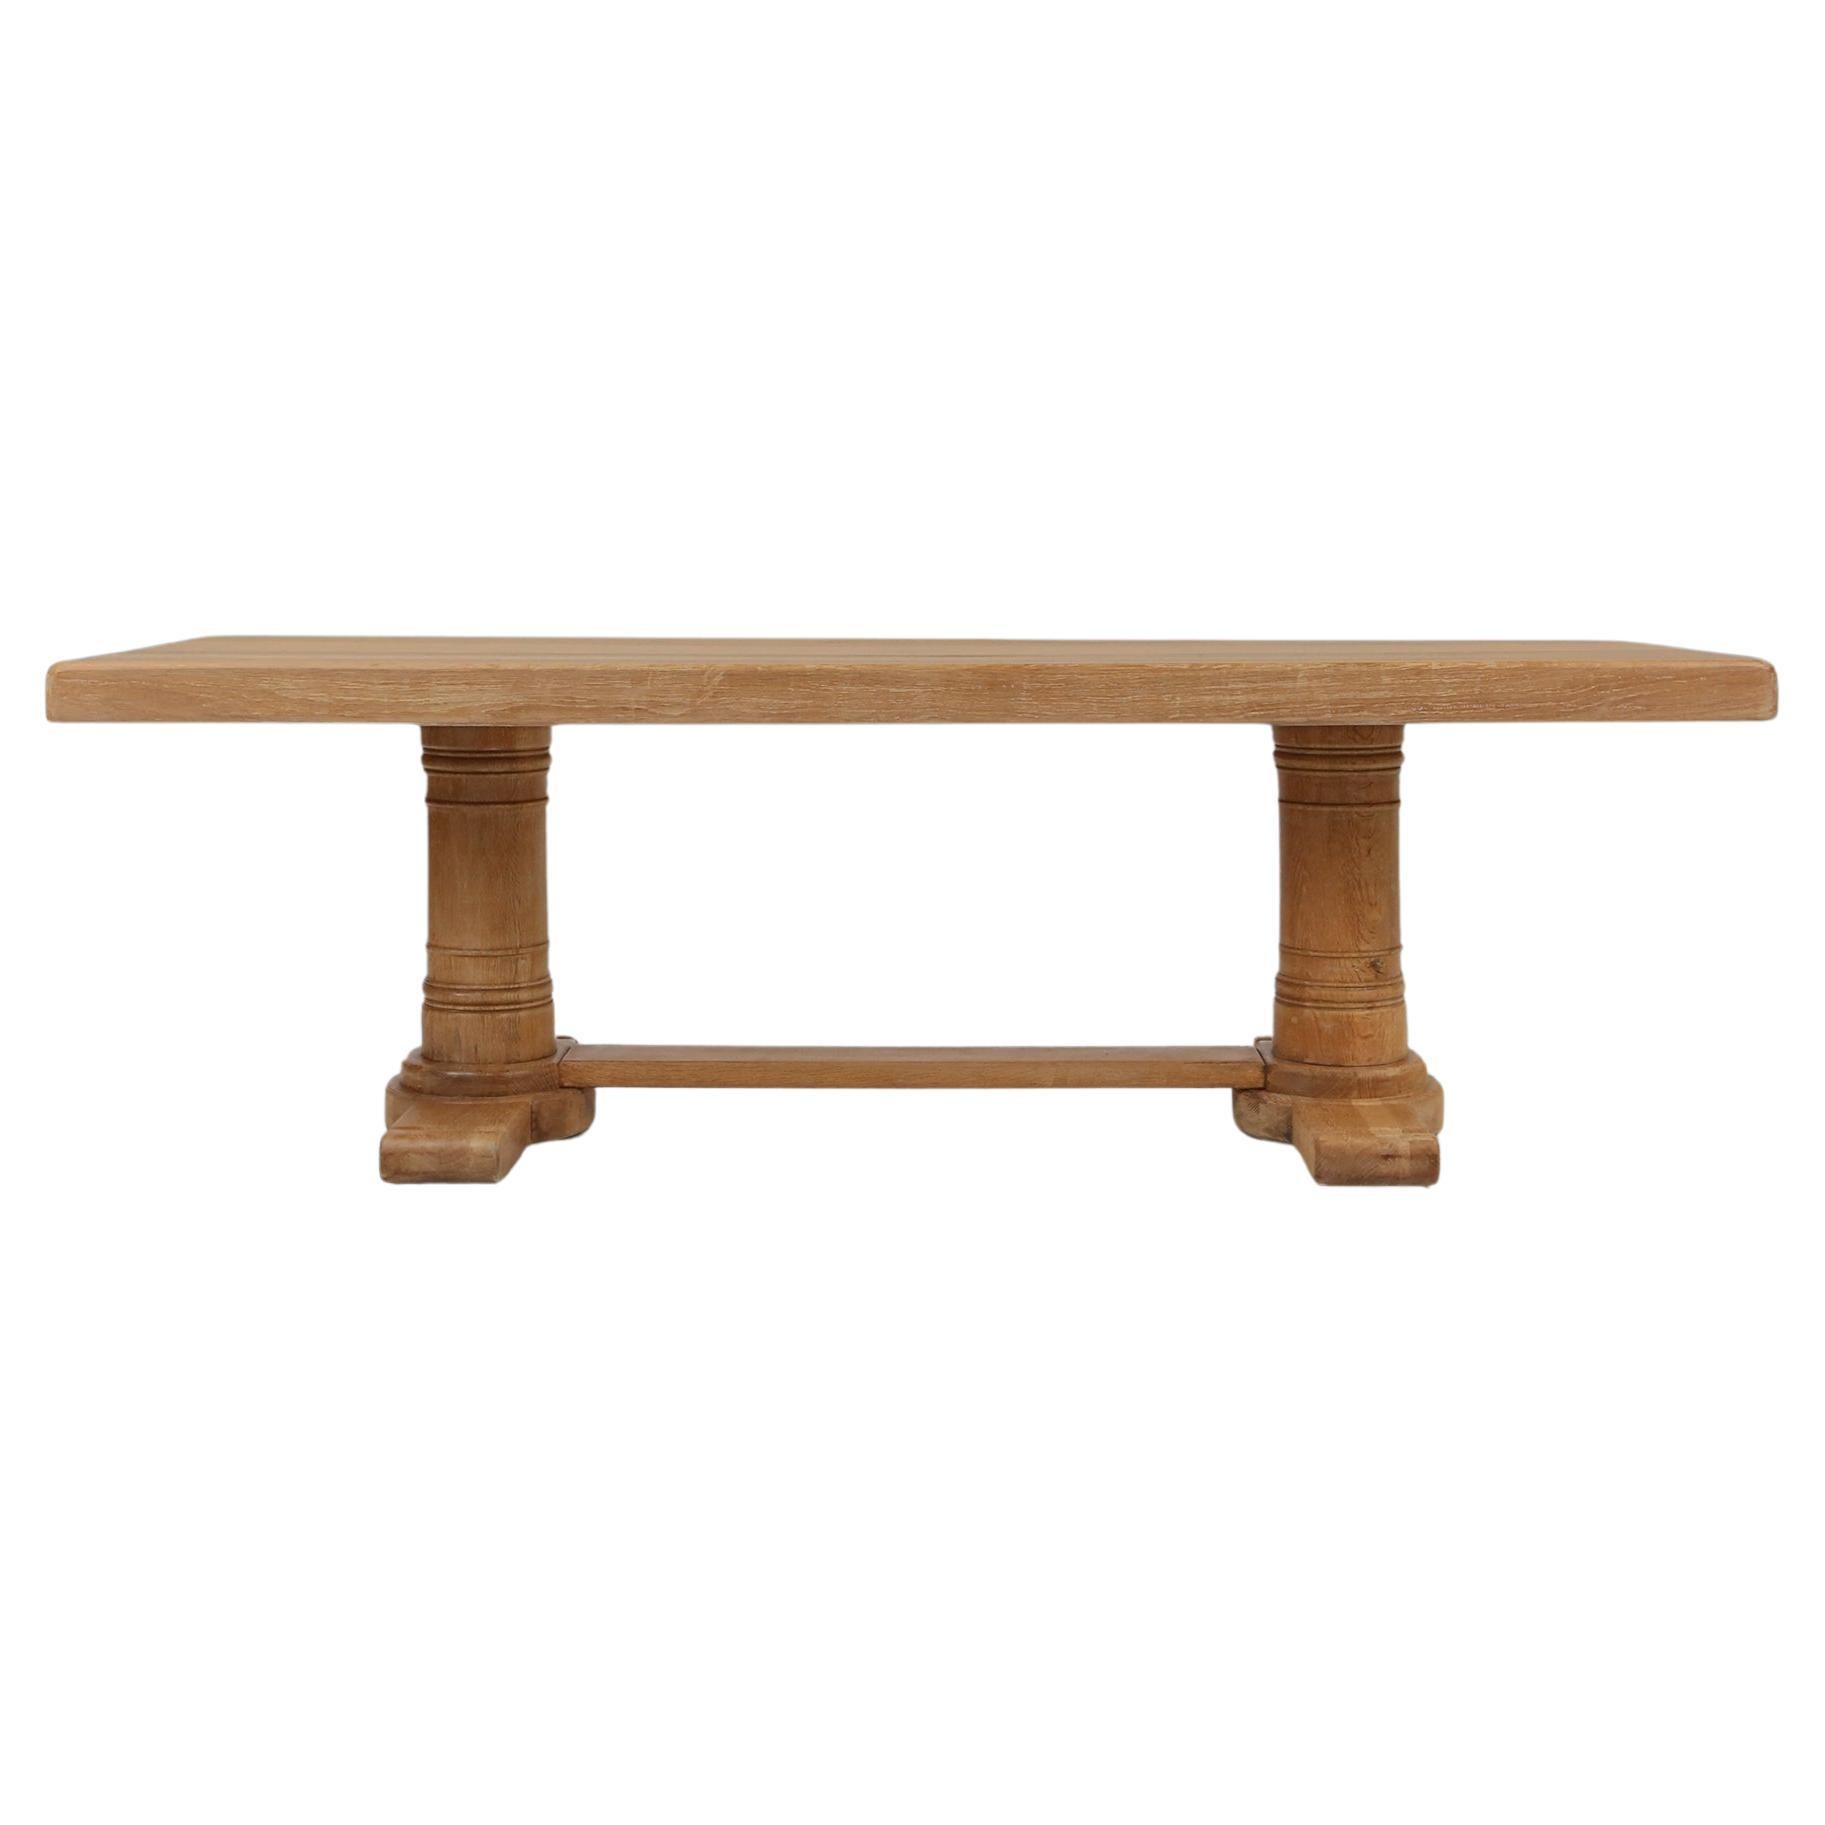 Rustic mid-century French dining table in oak from the 1950s